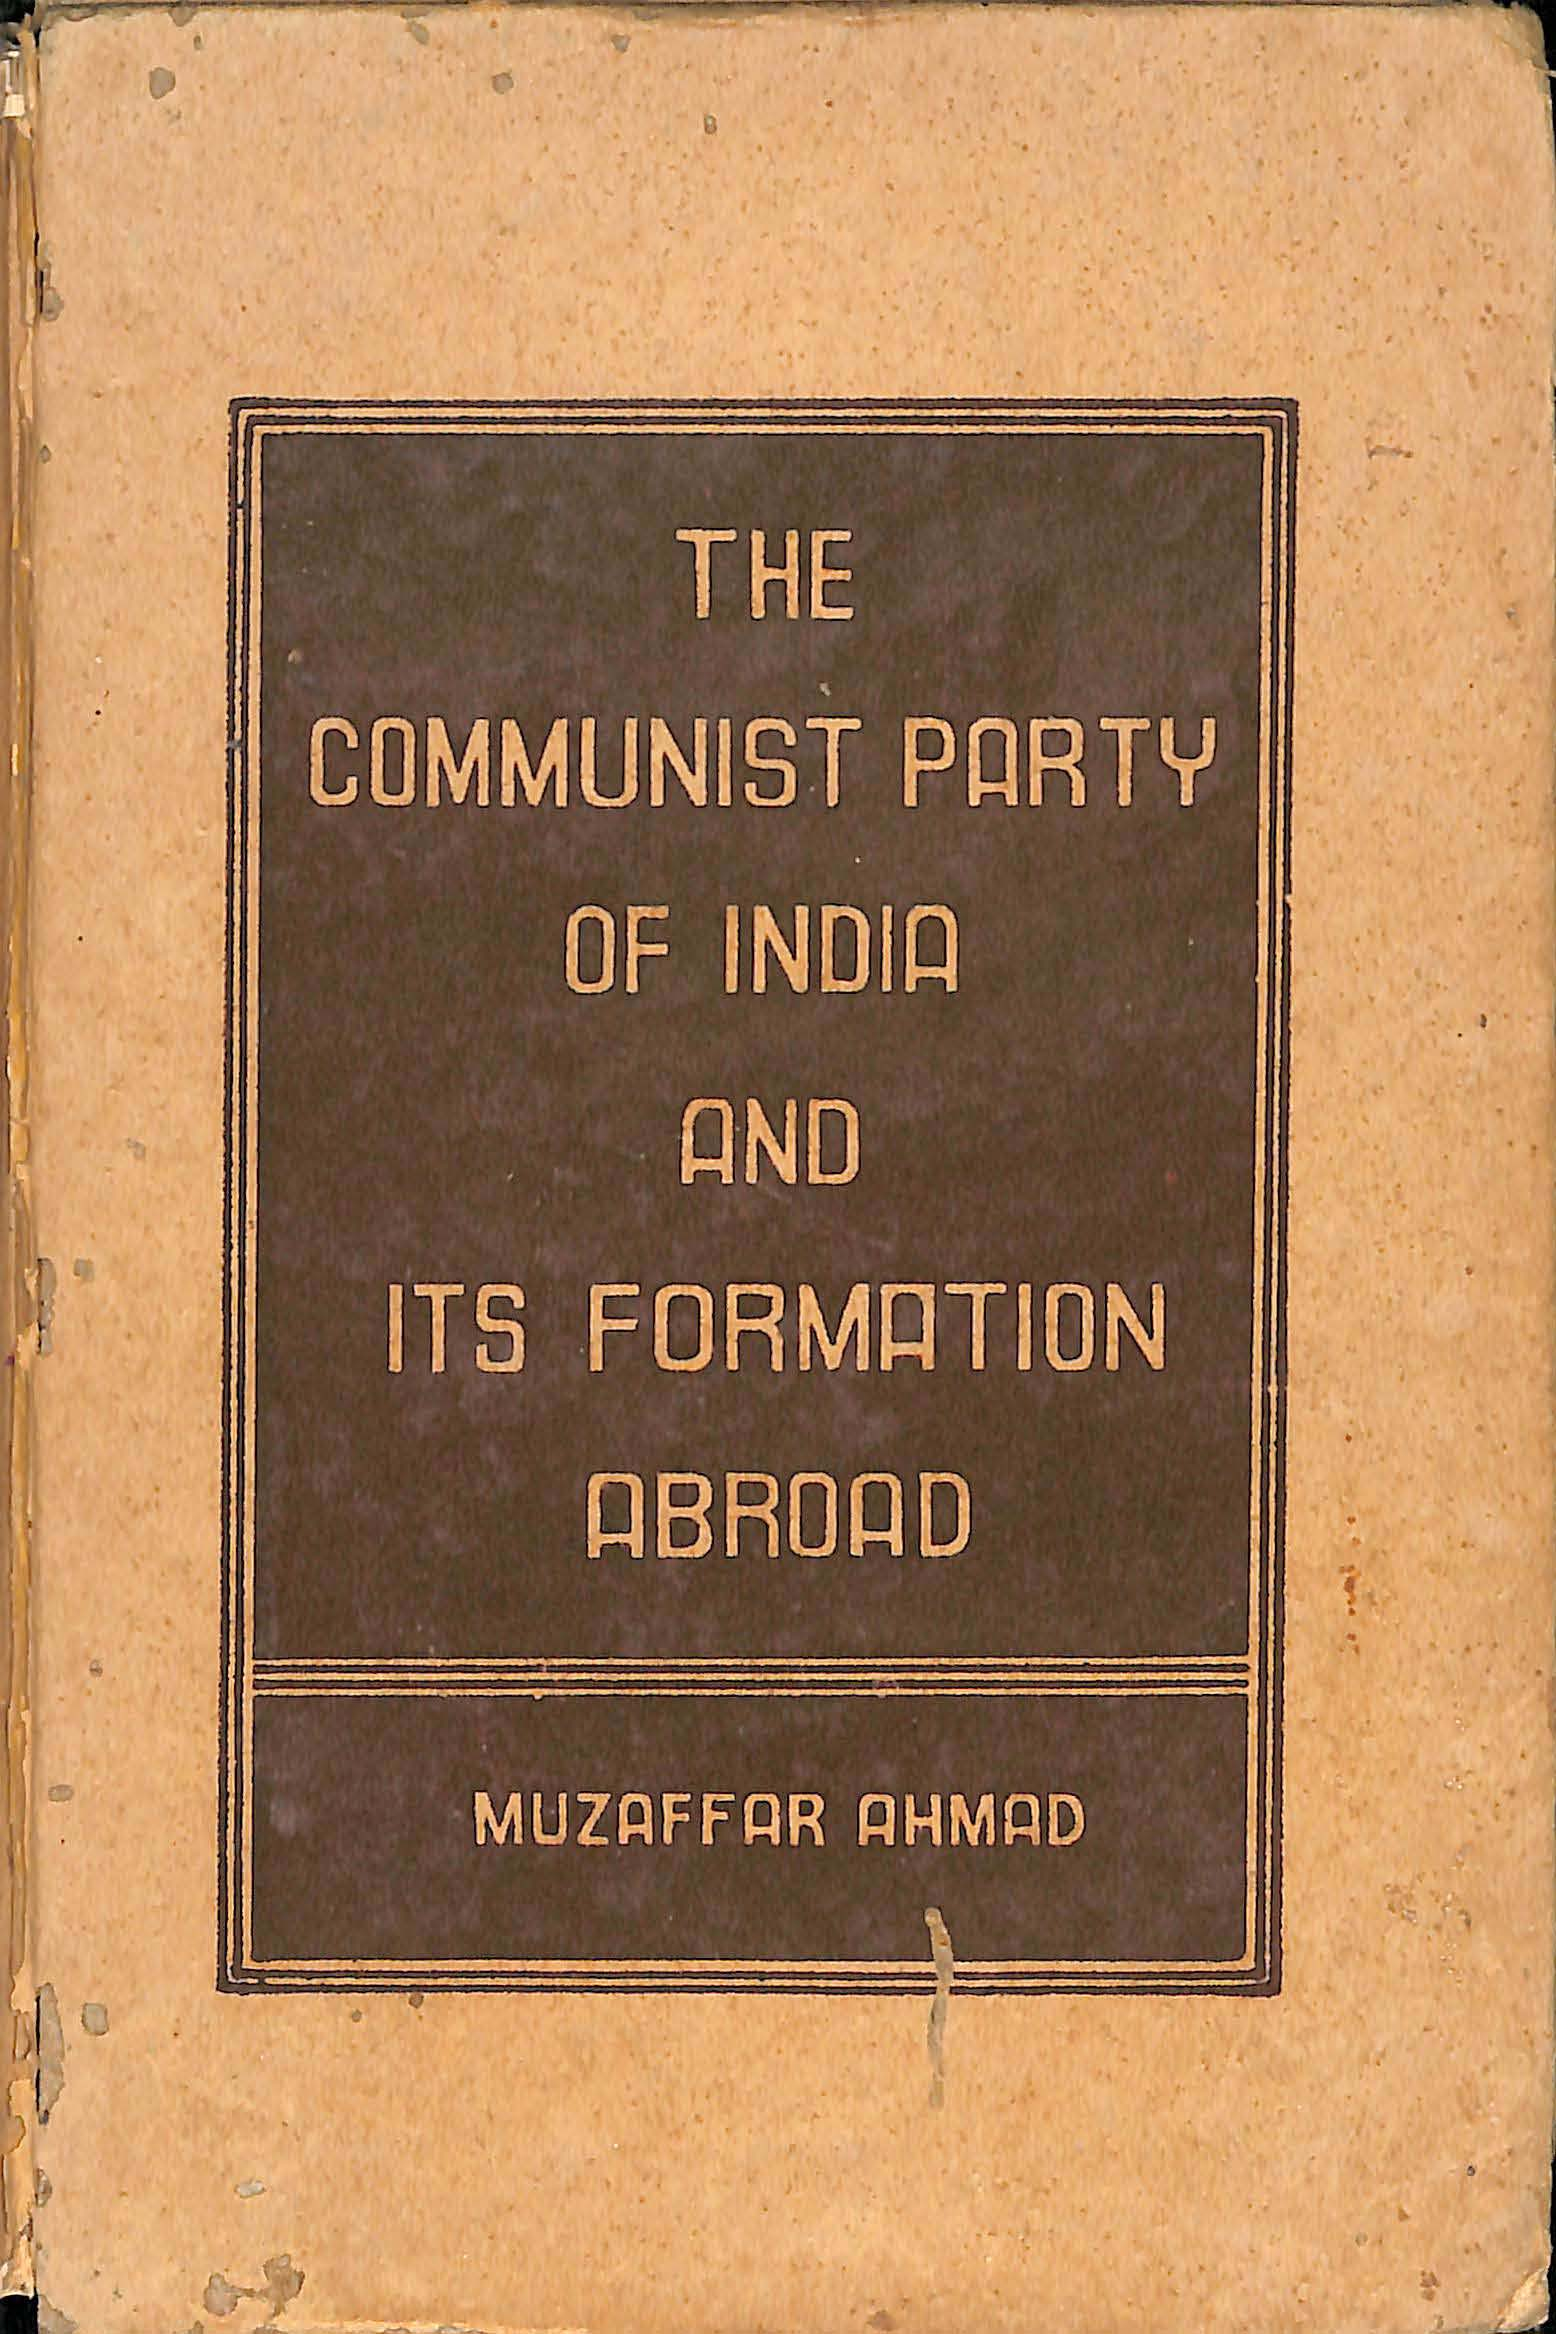 The Communist Party of India & Its Formation Abroad